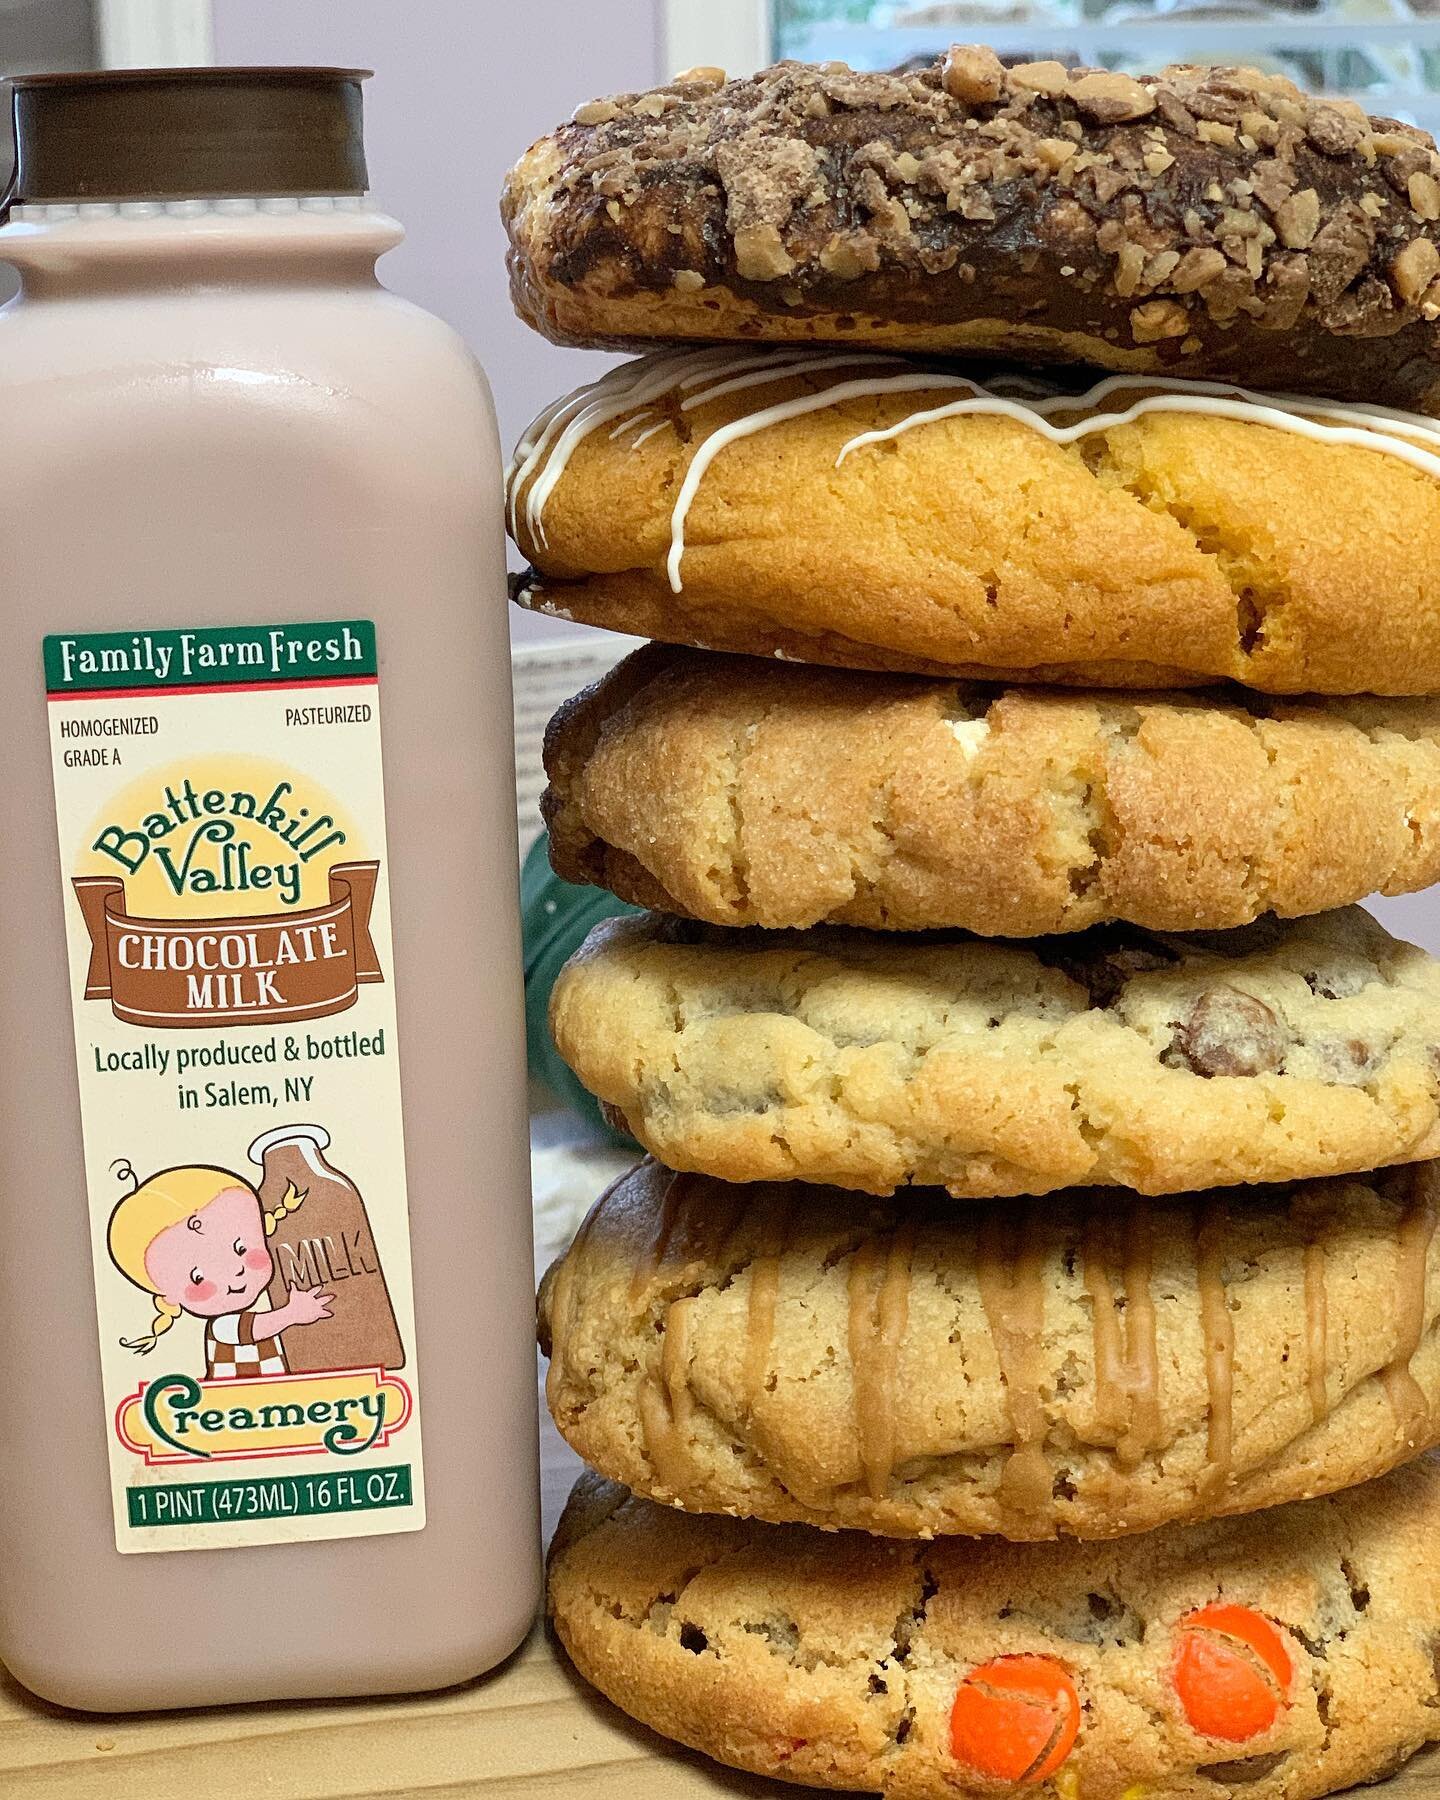 ✨I would say it&rsquo;s a good day for some 🥛 &amp; 🍪

🛍OPEN 9am-7pm! Walk in and buy any of our cookies!
💁🏻&zwj;♀️We are in COLONIE tonight! 5:30-7pm! Must pre order on the website for colonie pick up!
🚗💭GRUBHUB delivers for us in North Green